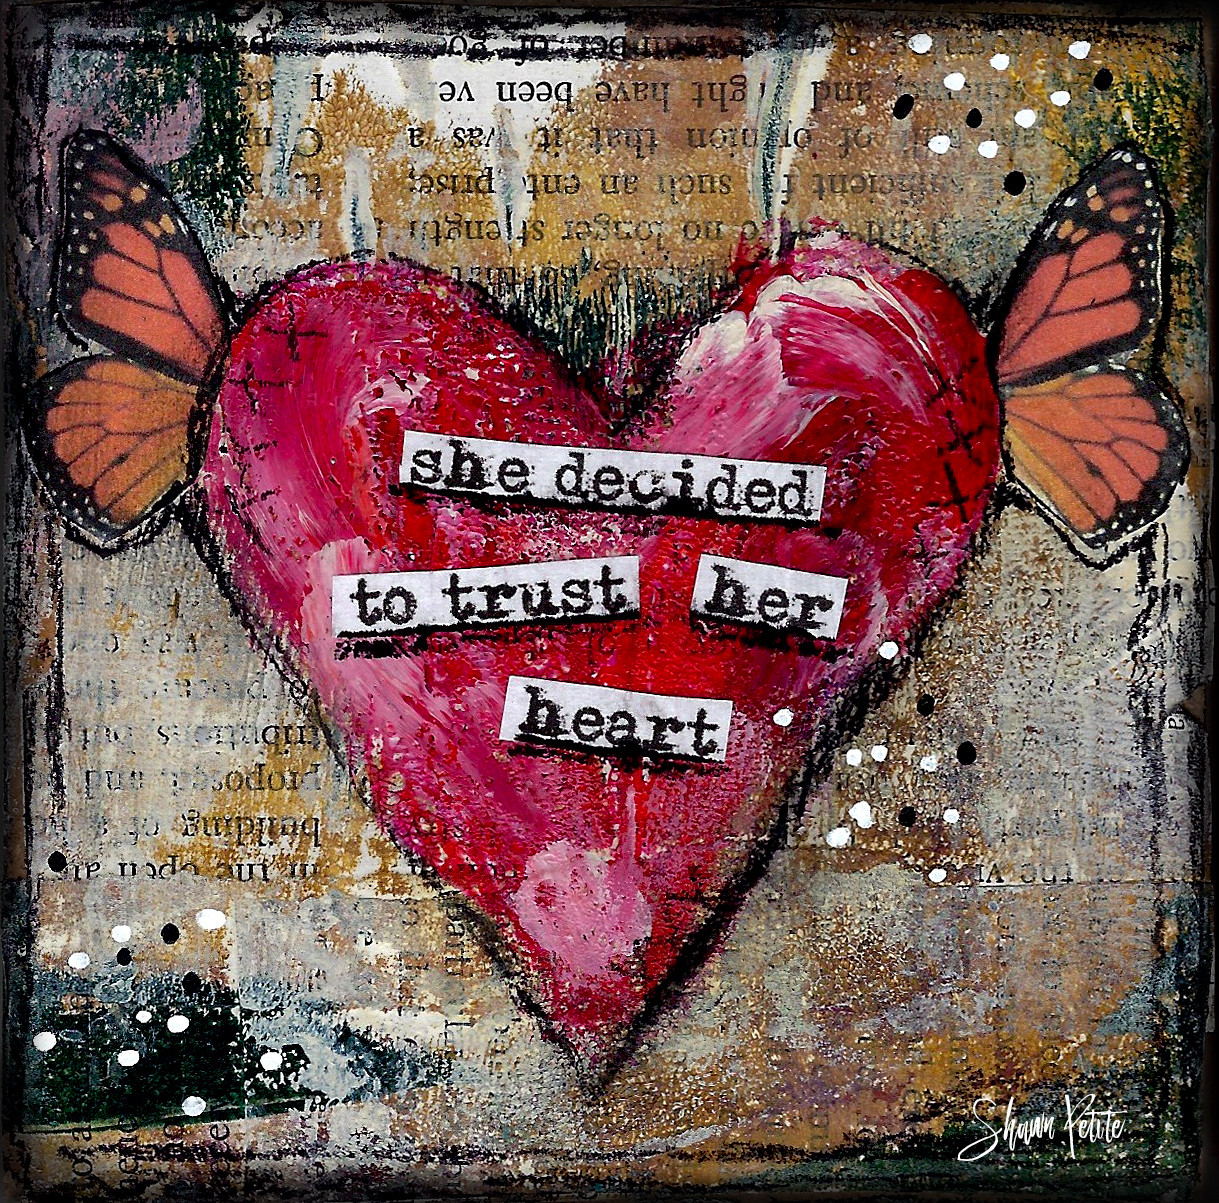 Giving hearts "She decided to trust her Heart" 4x4